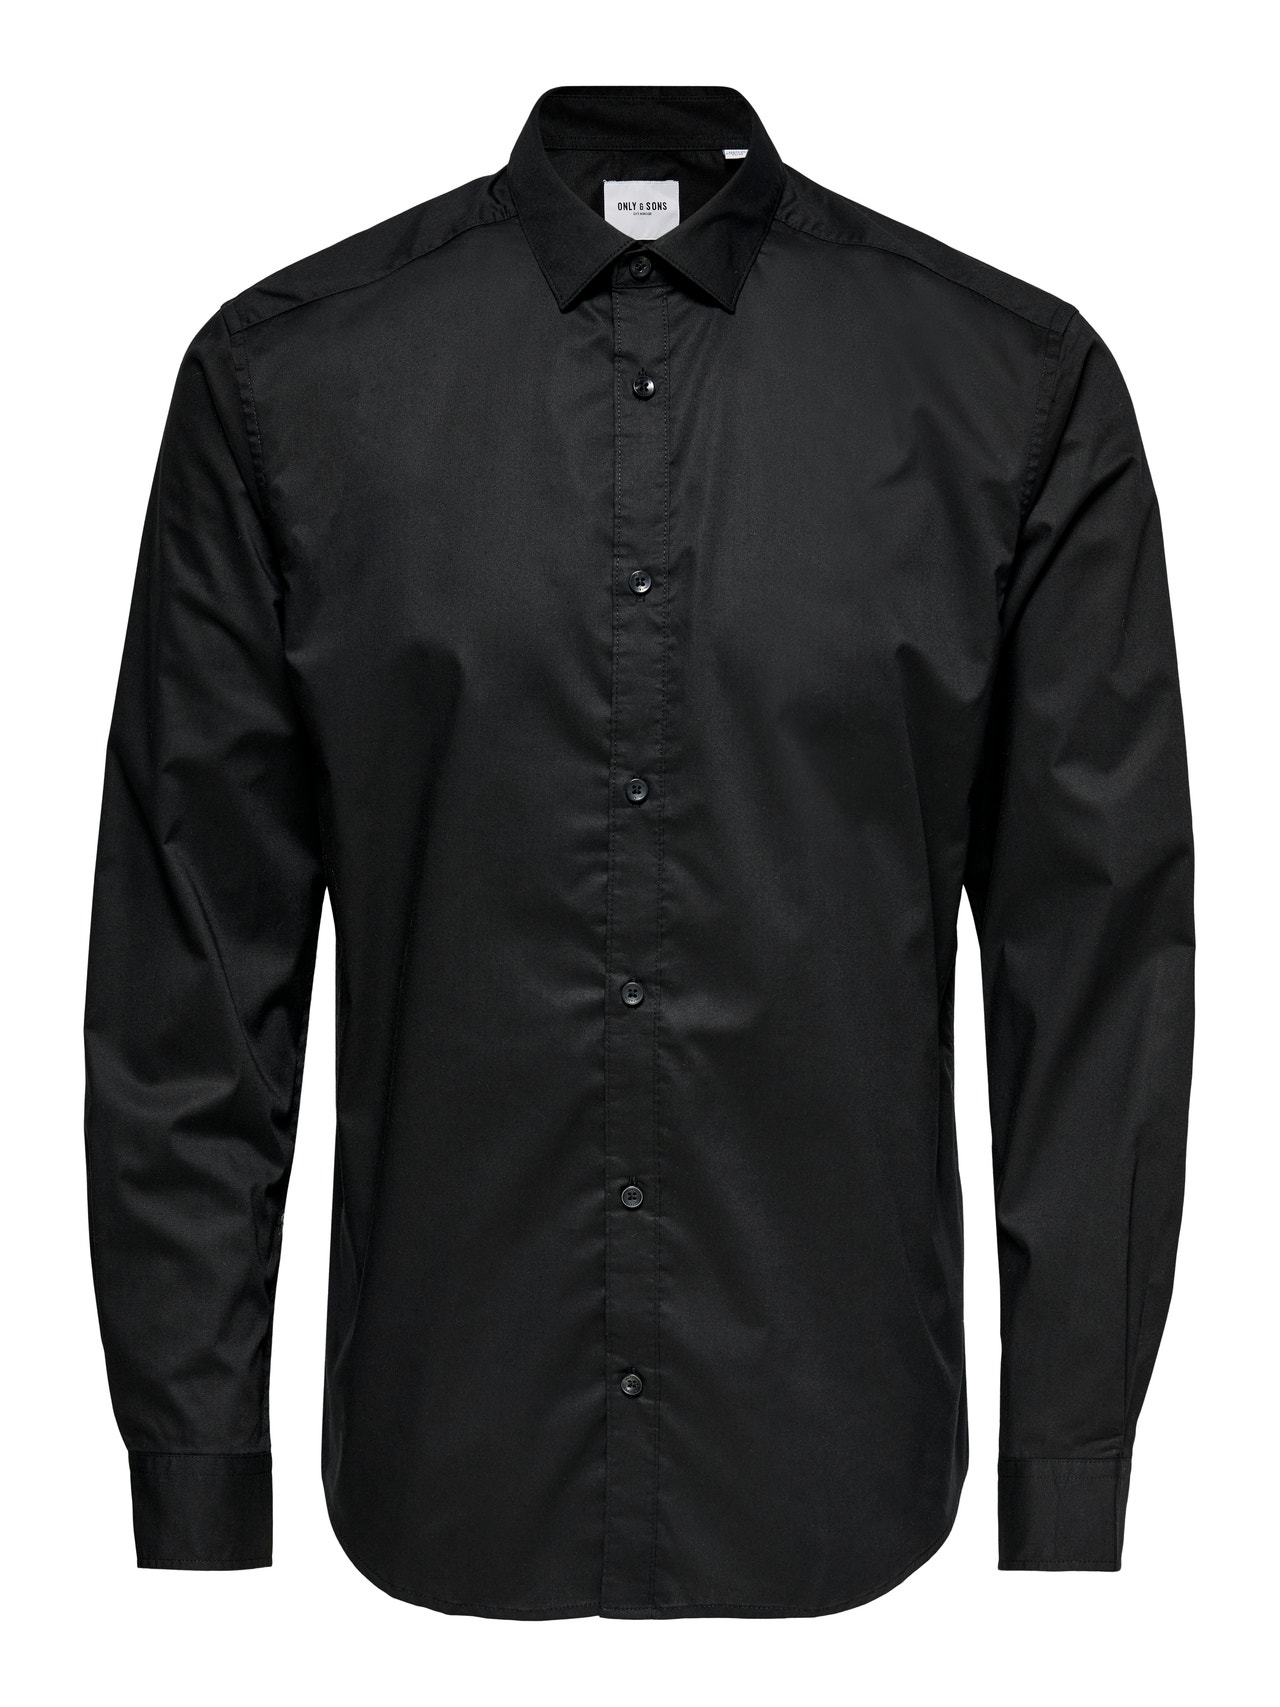 ONLY & SONS Classic shirt -Black - 22015472